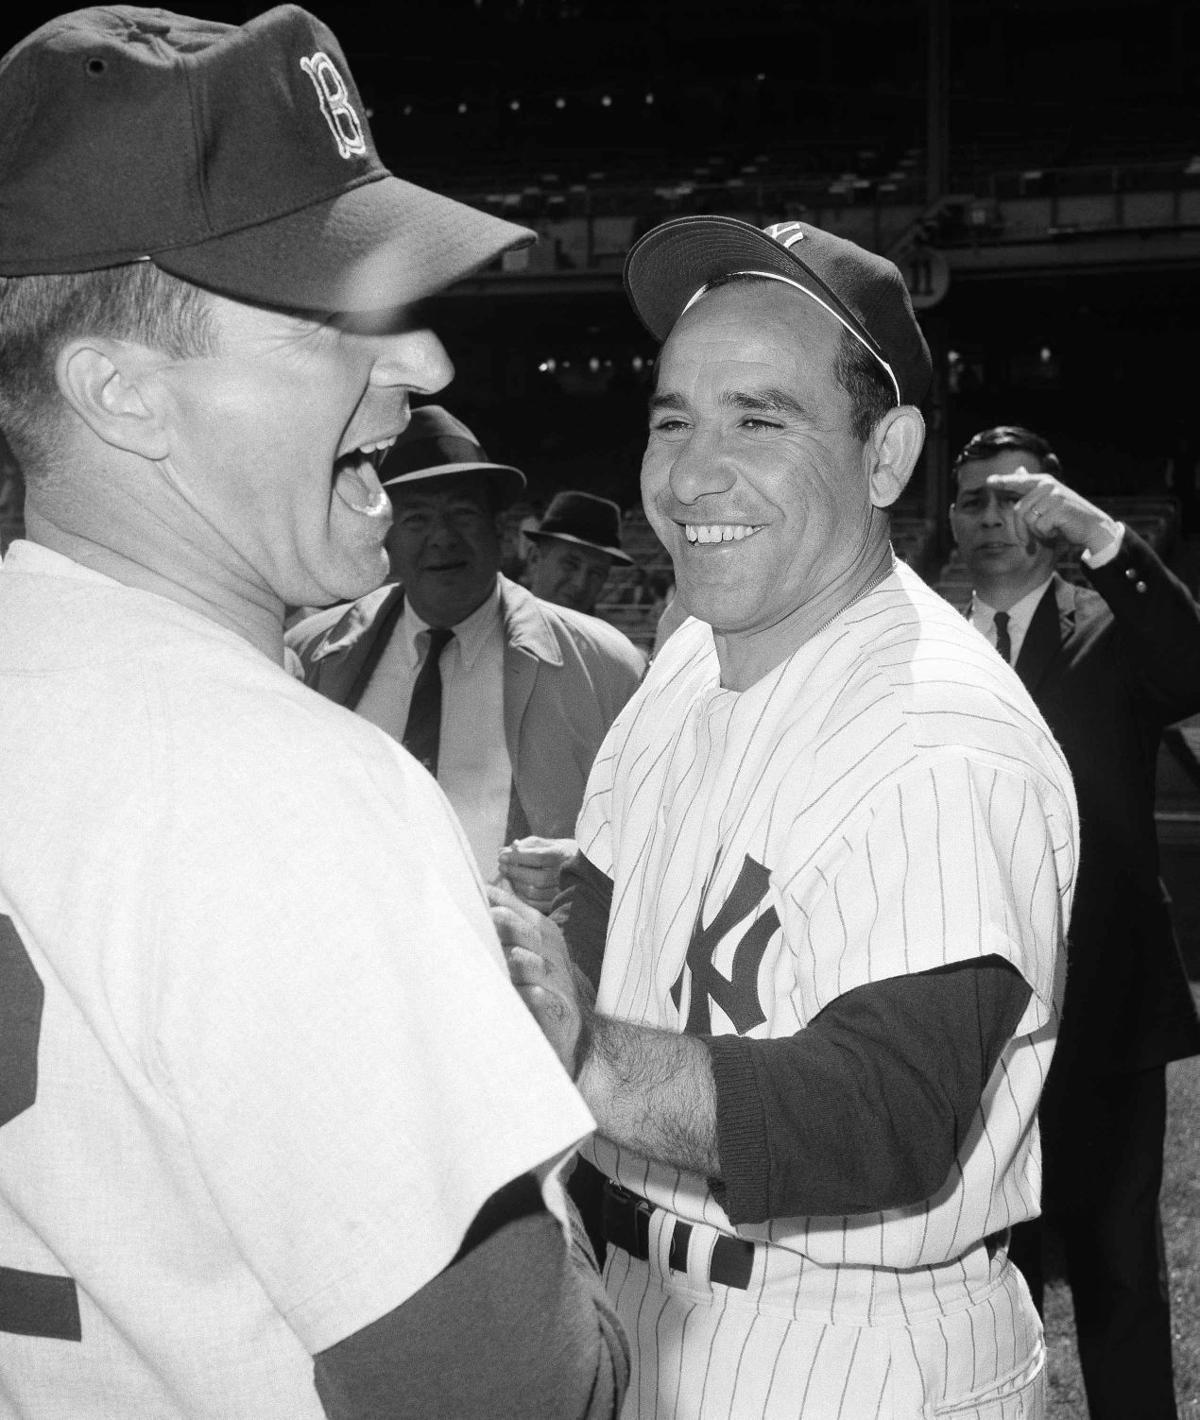 Don Larsen, Only Pitcher Perfect in World Series, Dies at 90 - Bloomberg